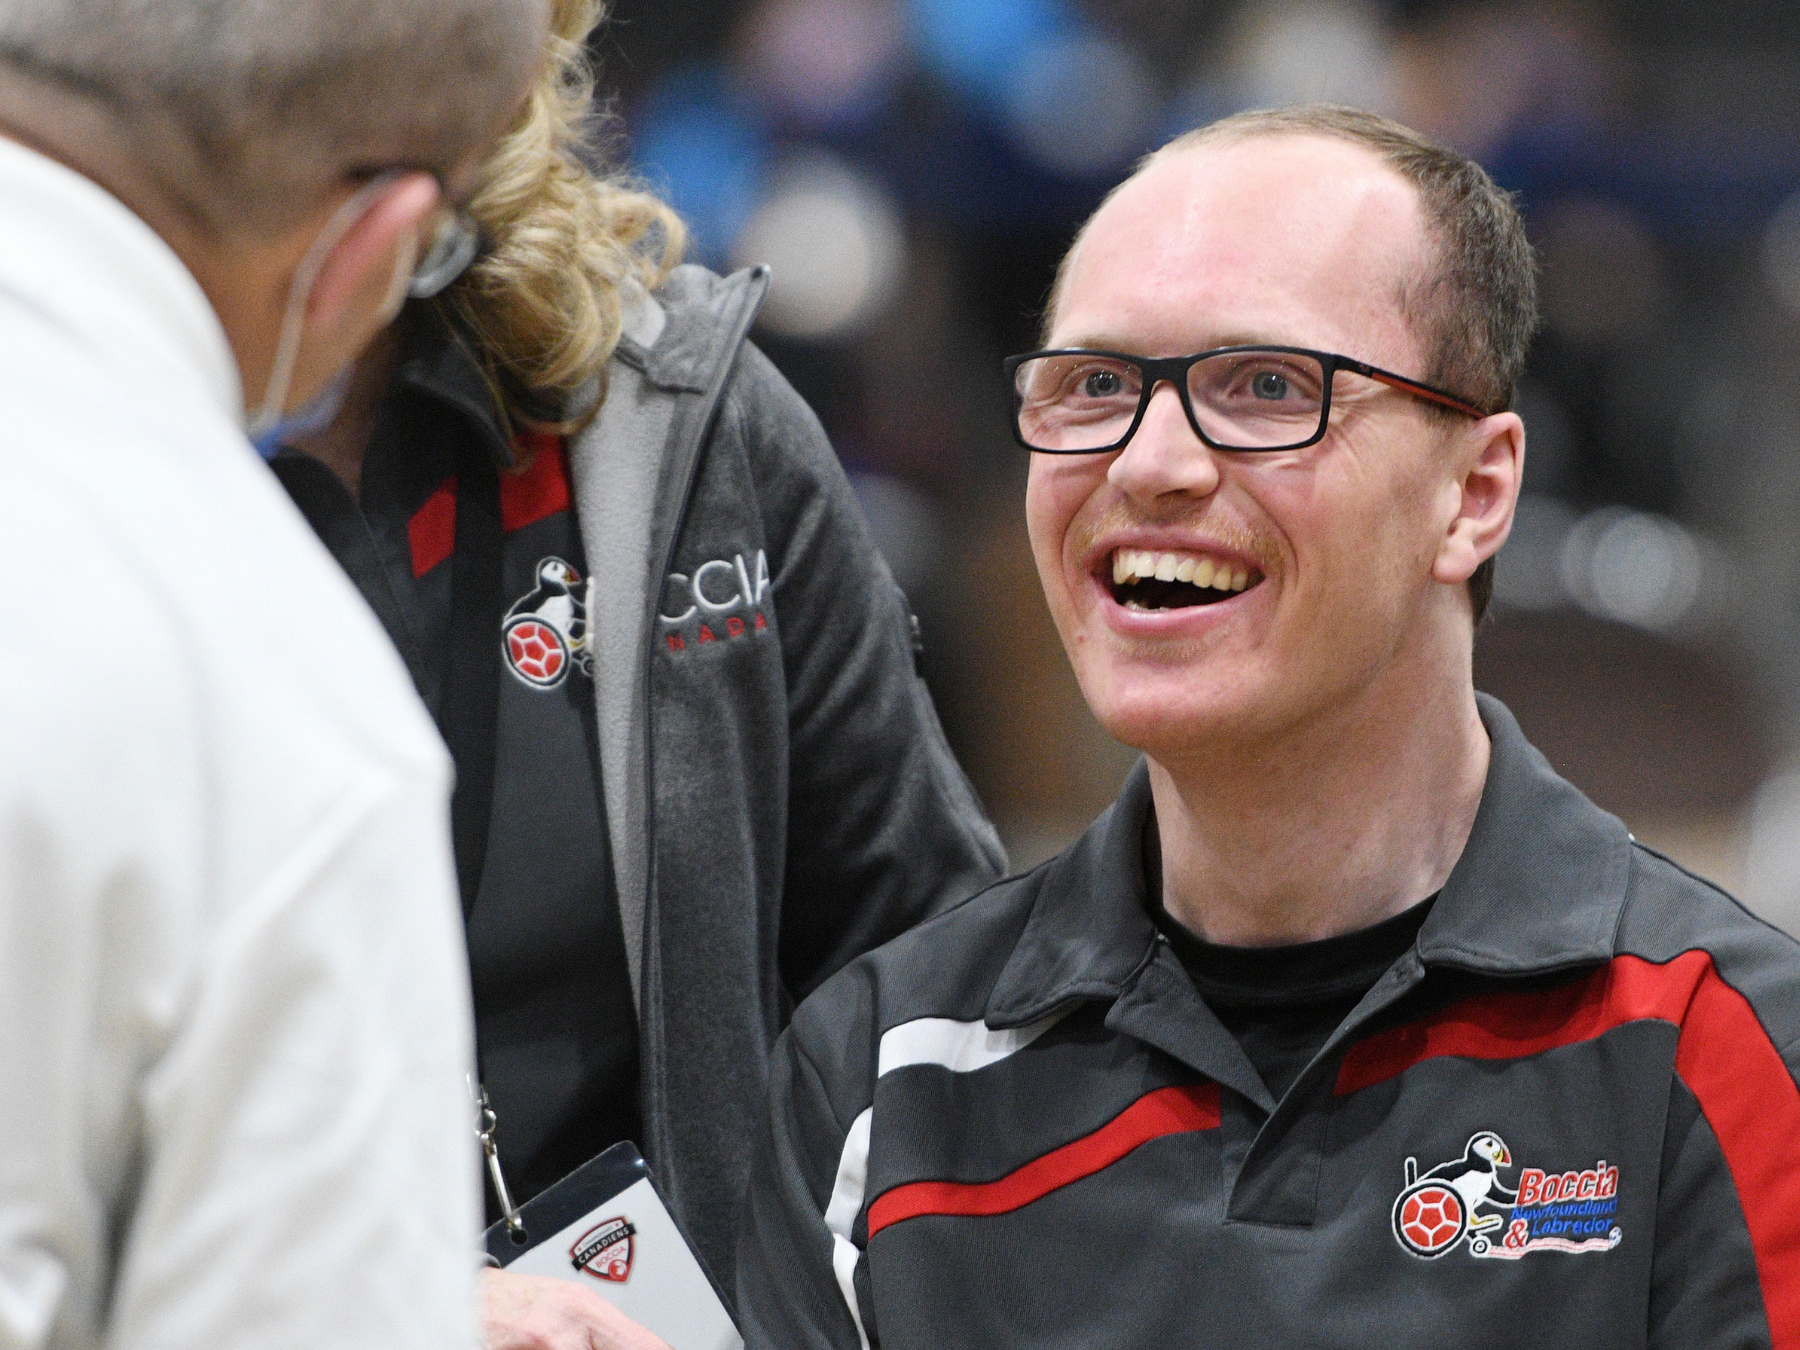 Michael Mercer celebrates double gold at the 2021 Canadian Boccia Championships